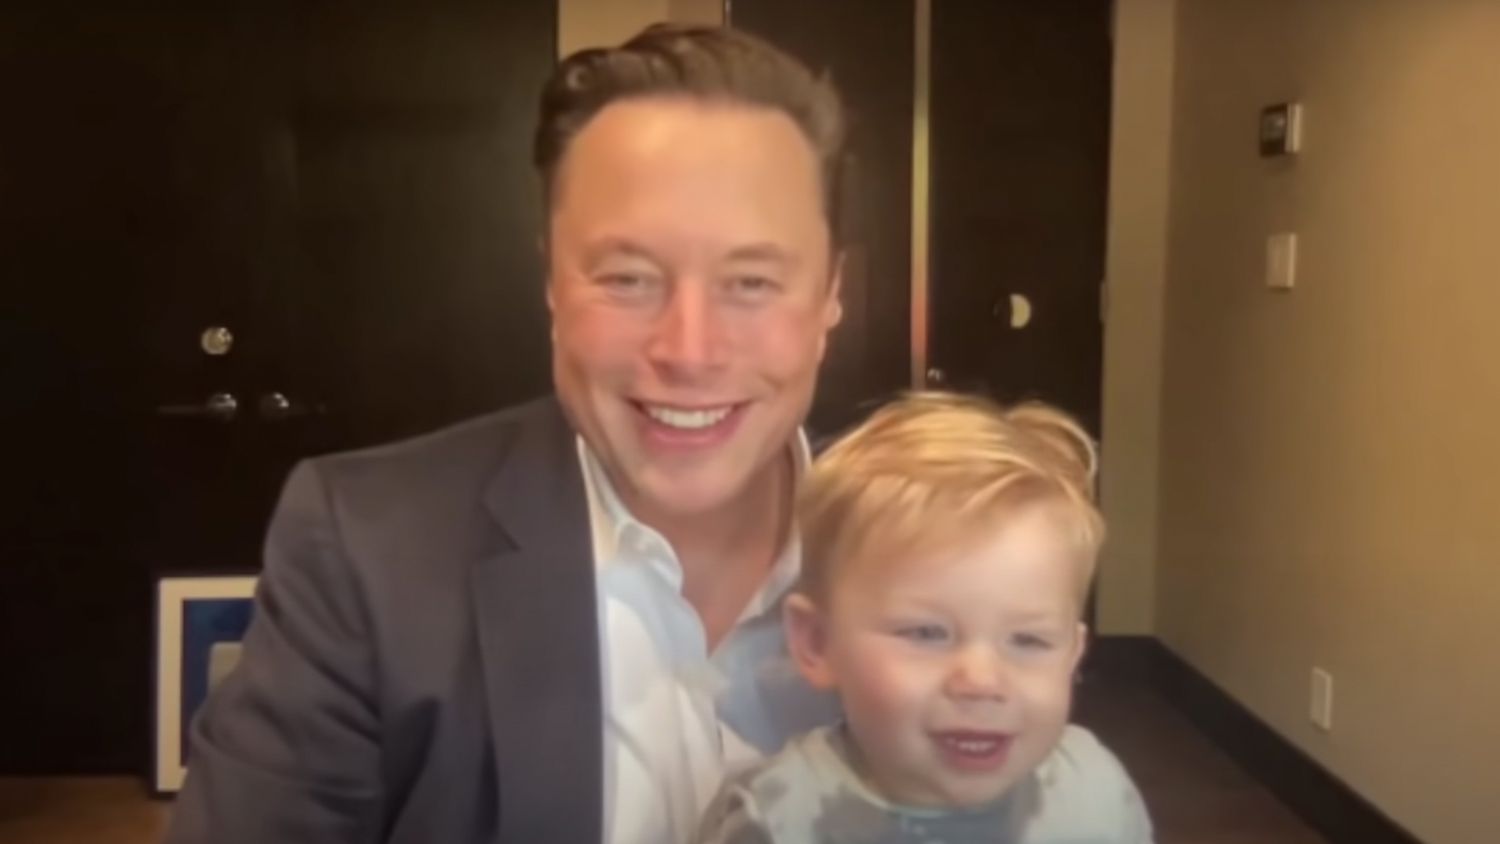 Elon Musk's Son Steals the Spotlight During SpaceX Presentation